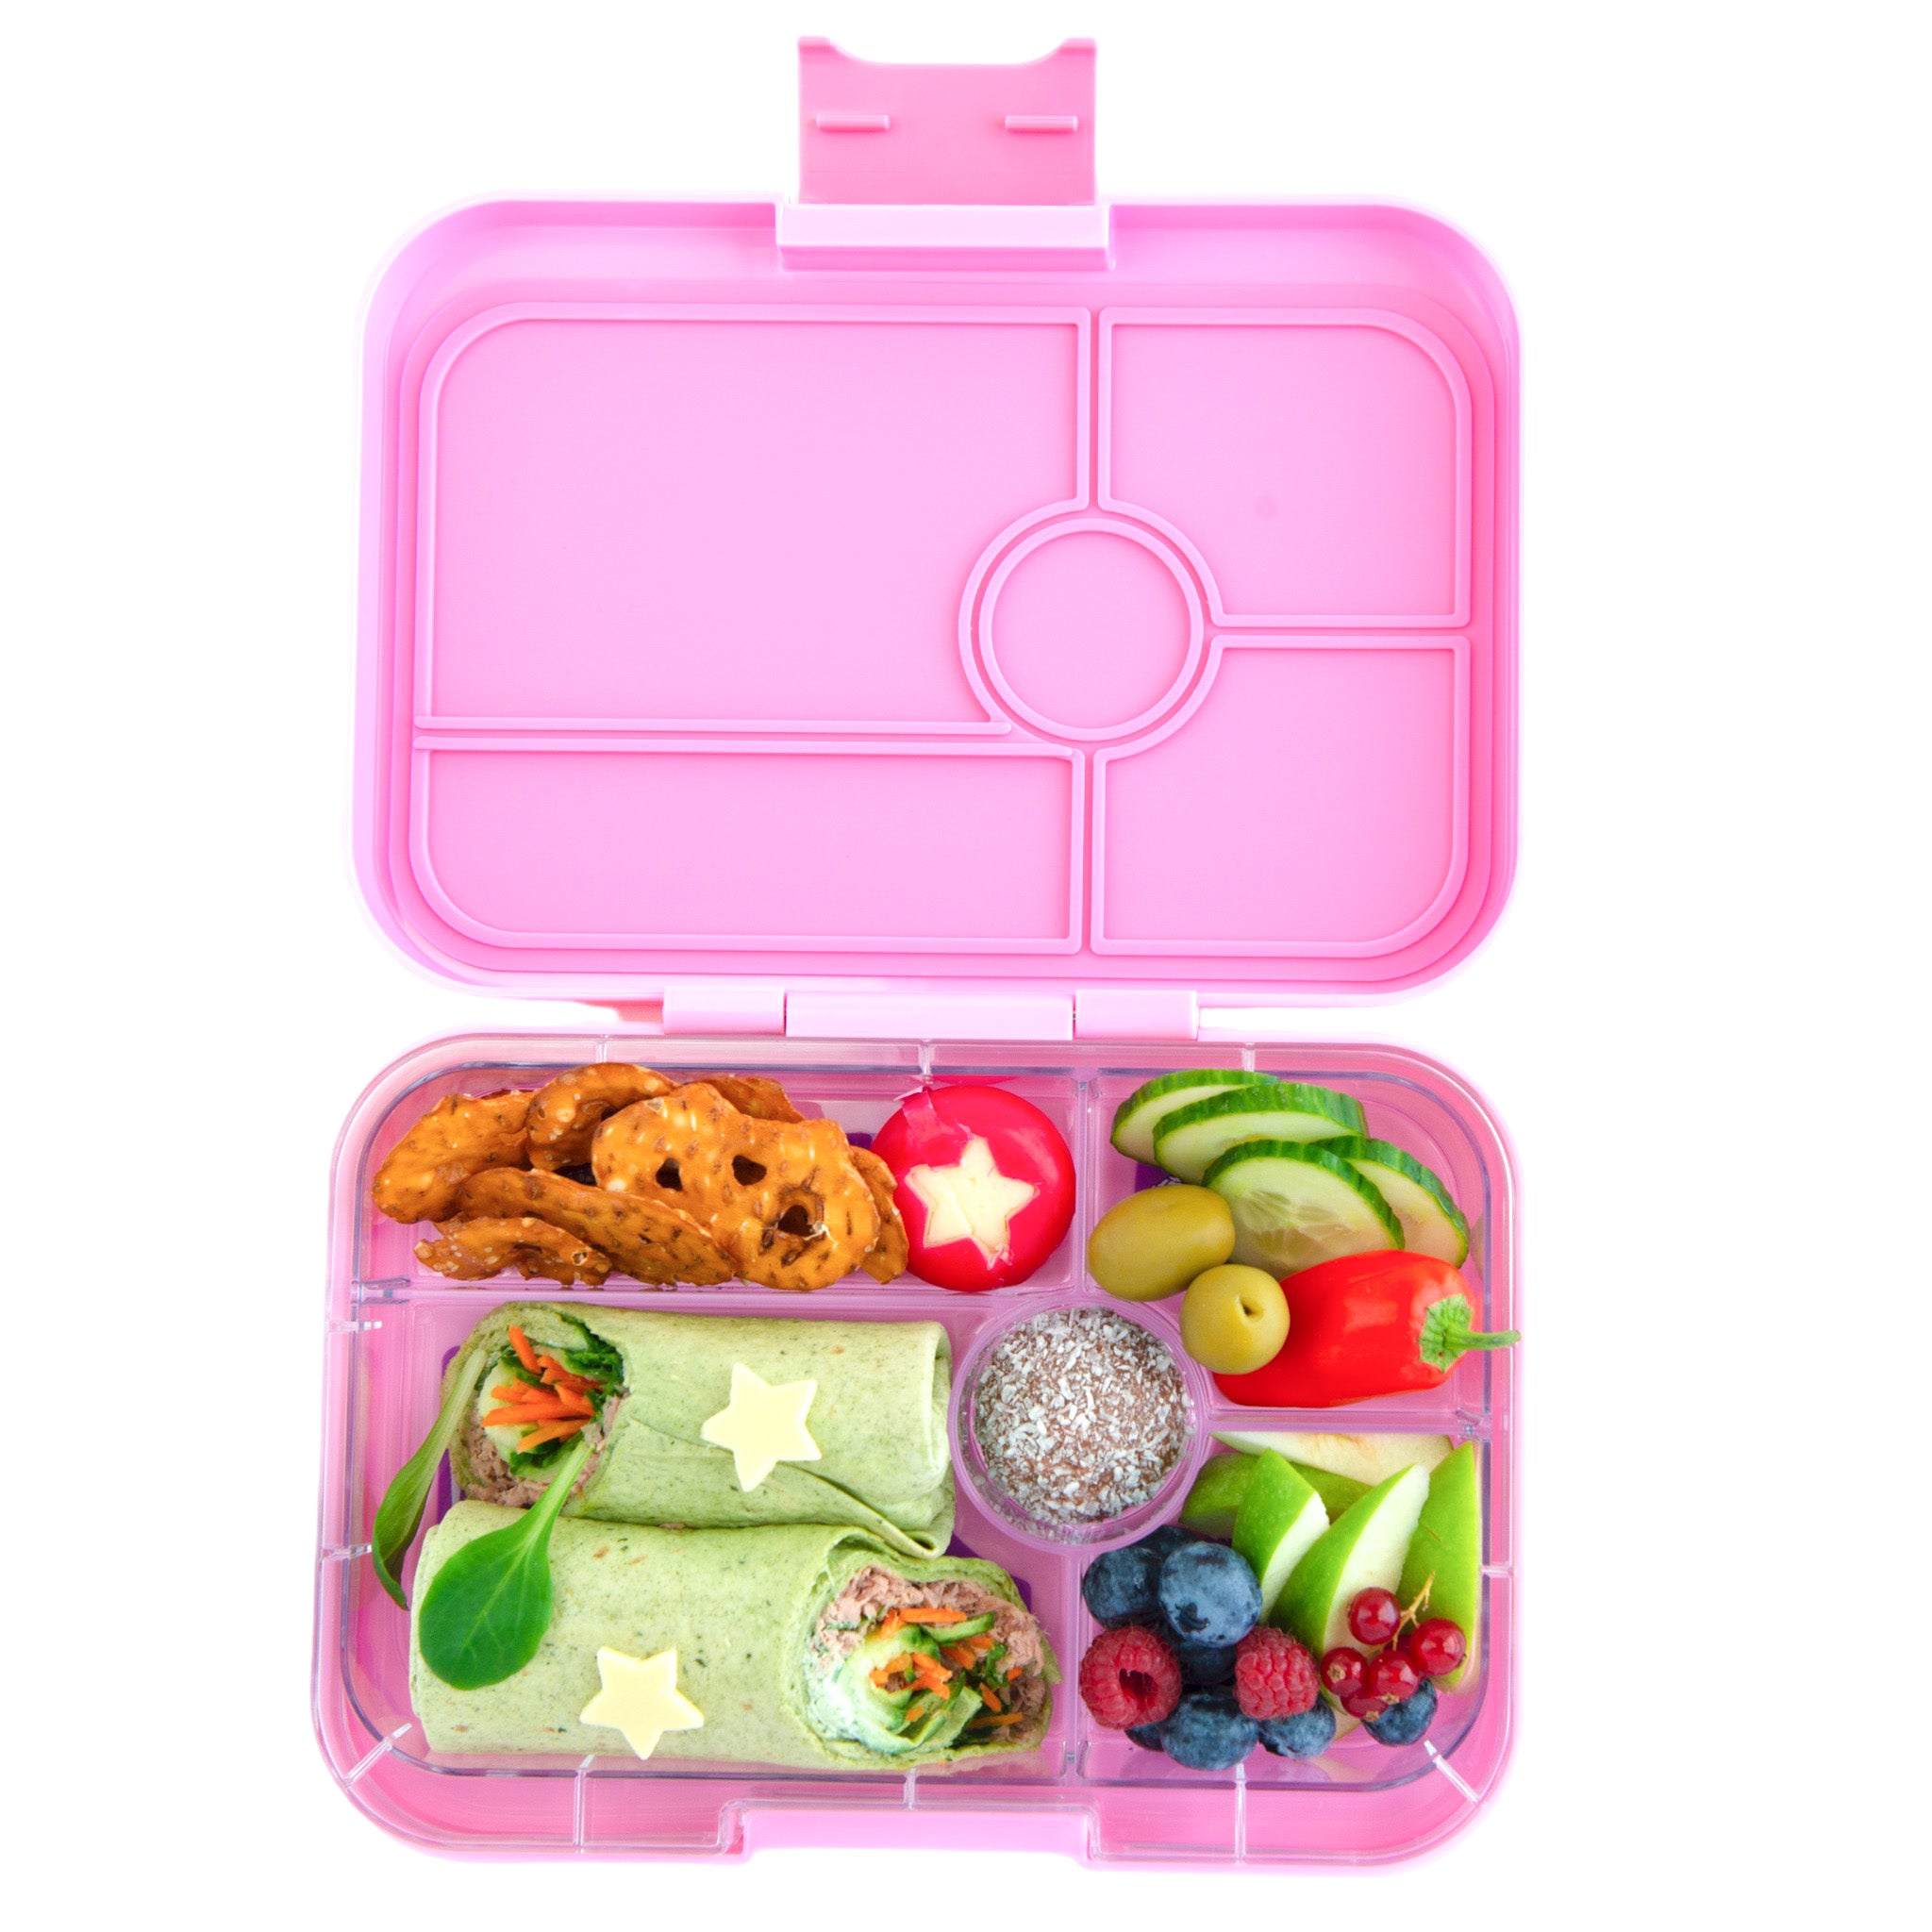 Yumbox Panino, 4-Compartment Leakproof Bento Box for Kids, 8.5x6x1.8;  Single Latch Kids Lunch Box Container; BPA-Free, Durable & Easy Clean (Fifi  Pink